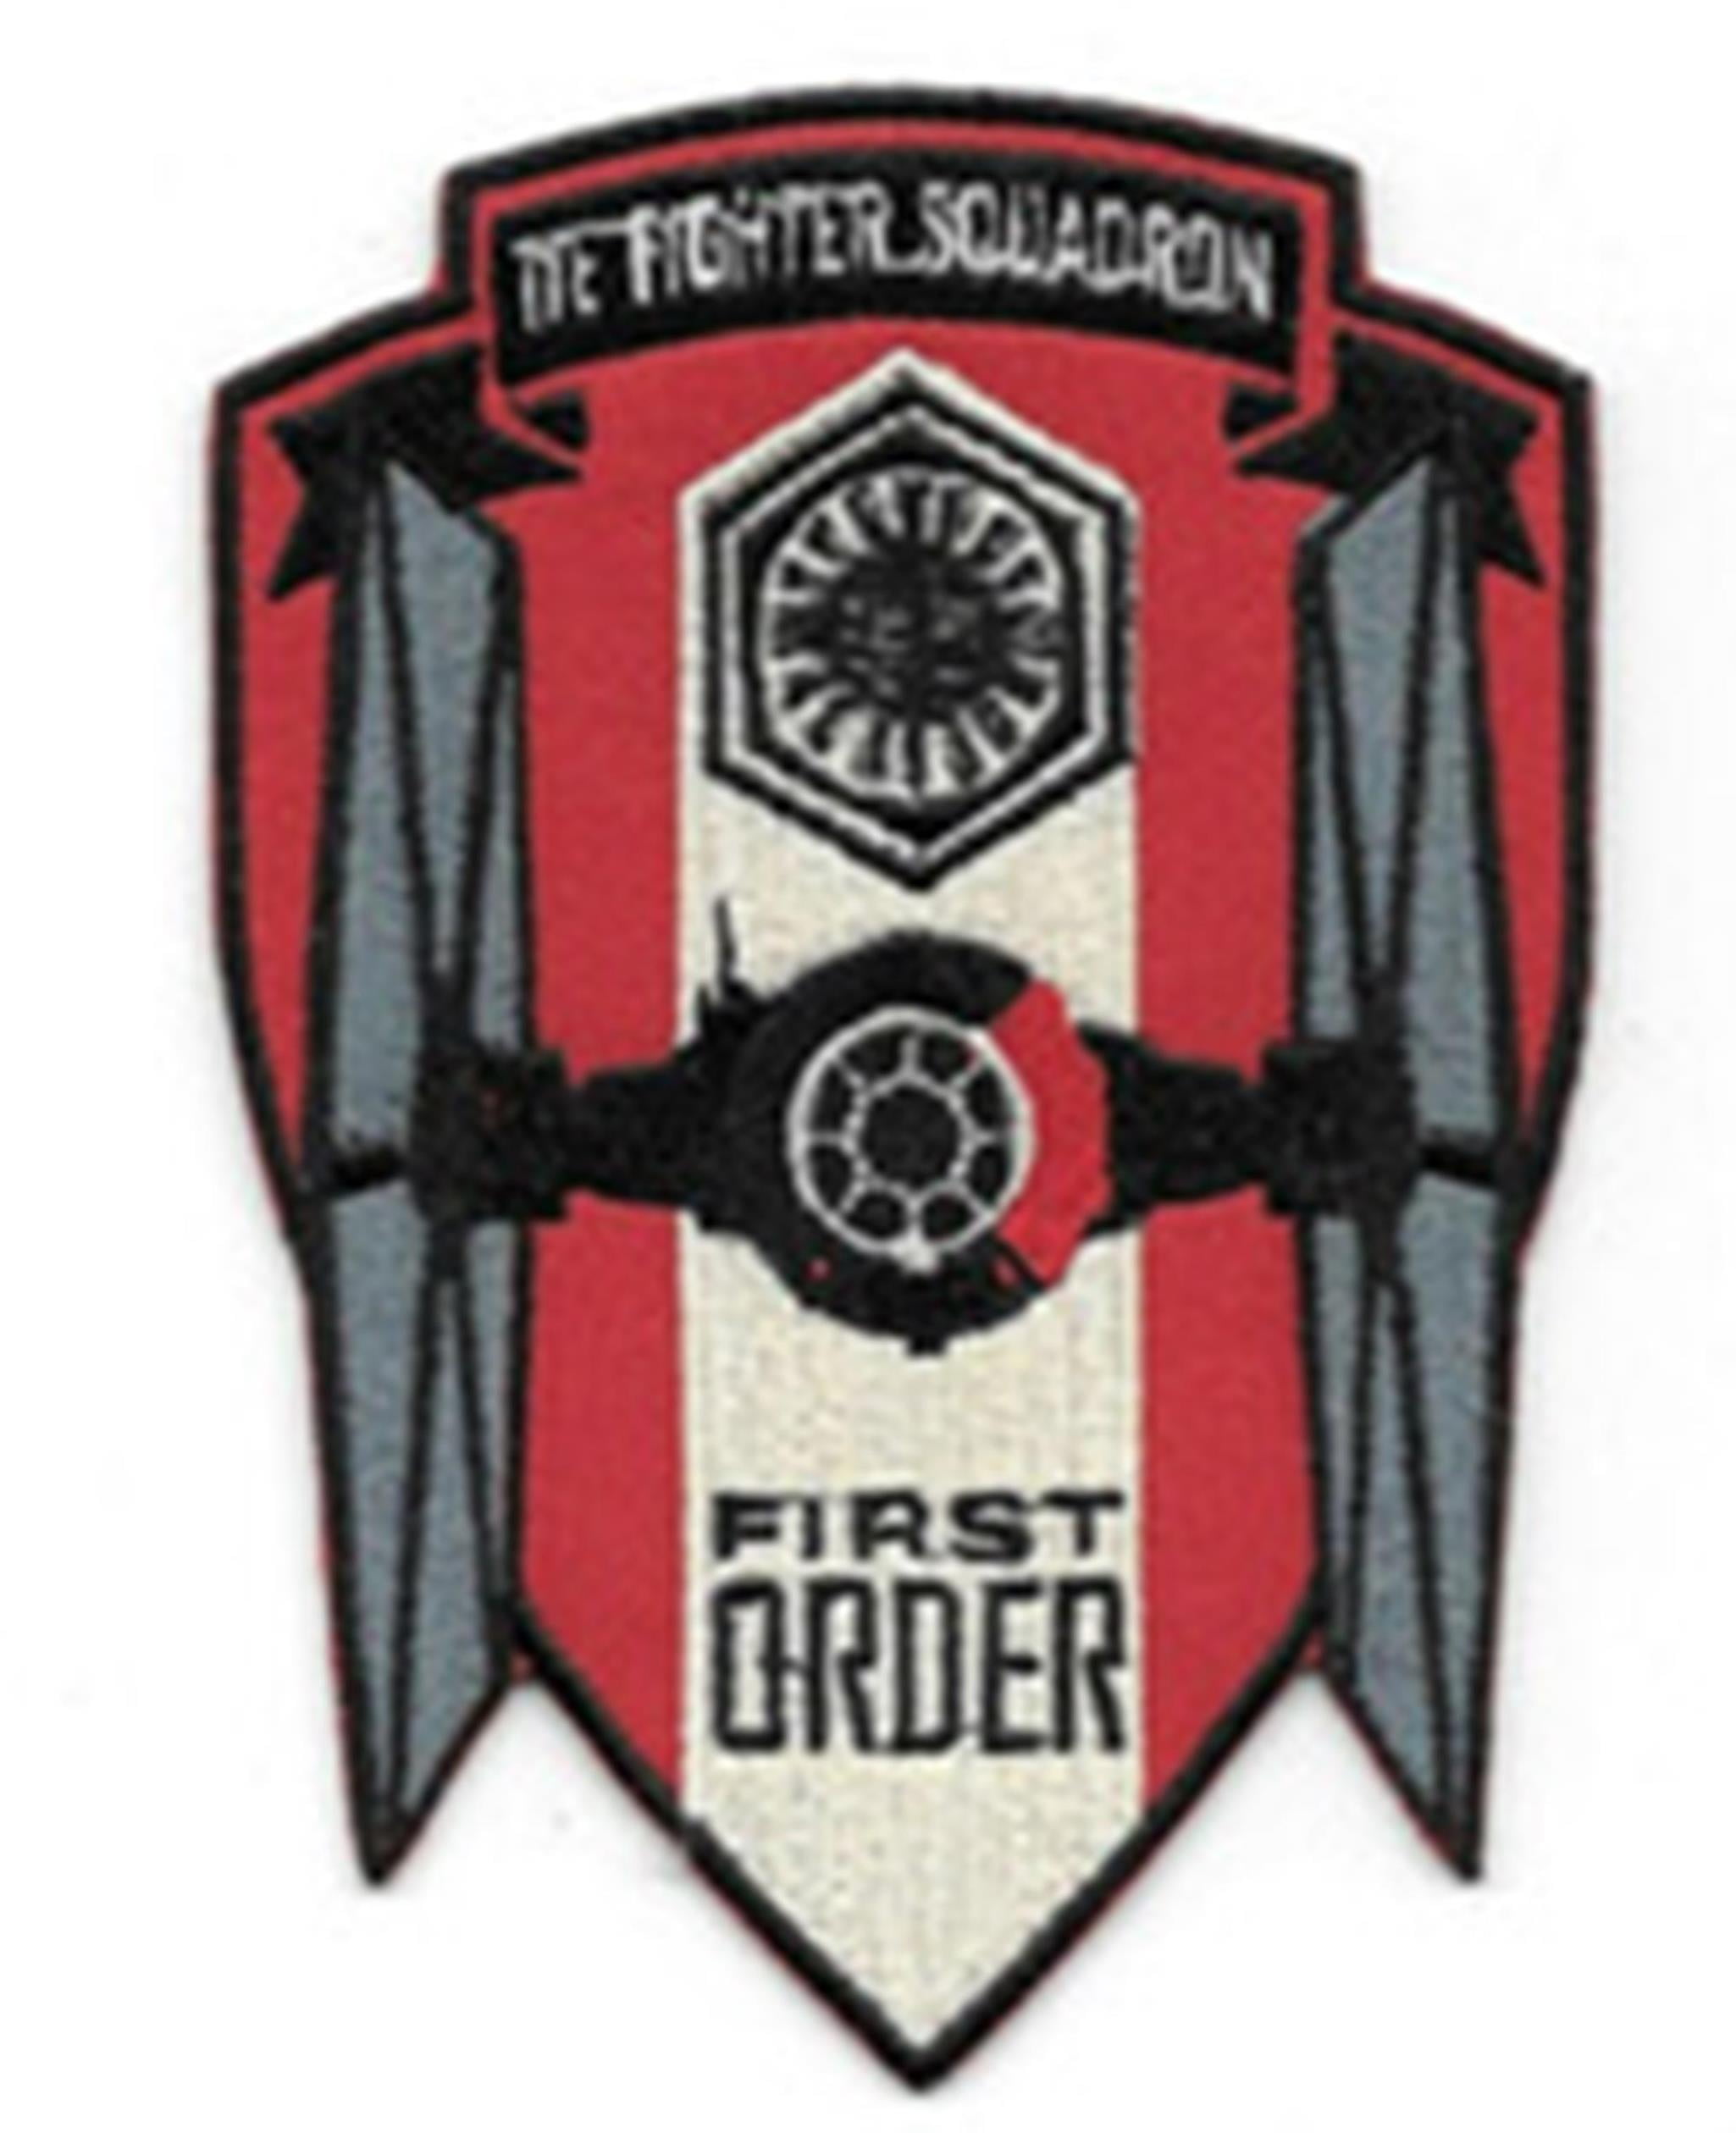 Mandalorian Double Shield Superhero movie Patch Embroidered Iron on Patch Sew on Badge